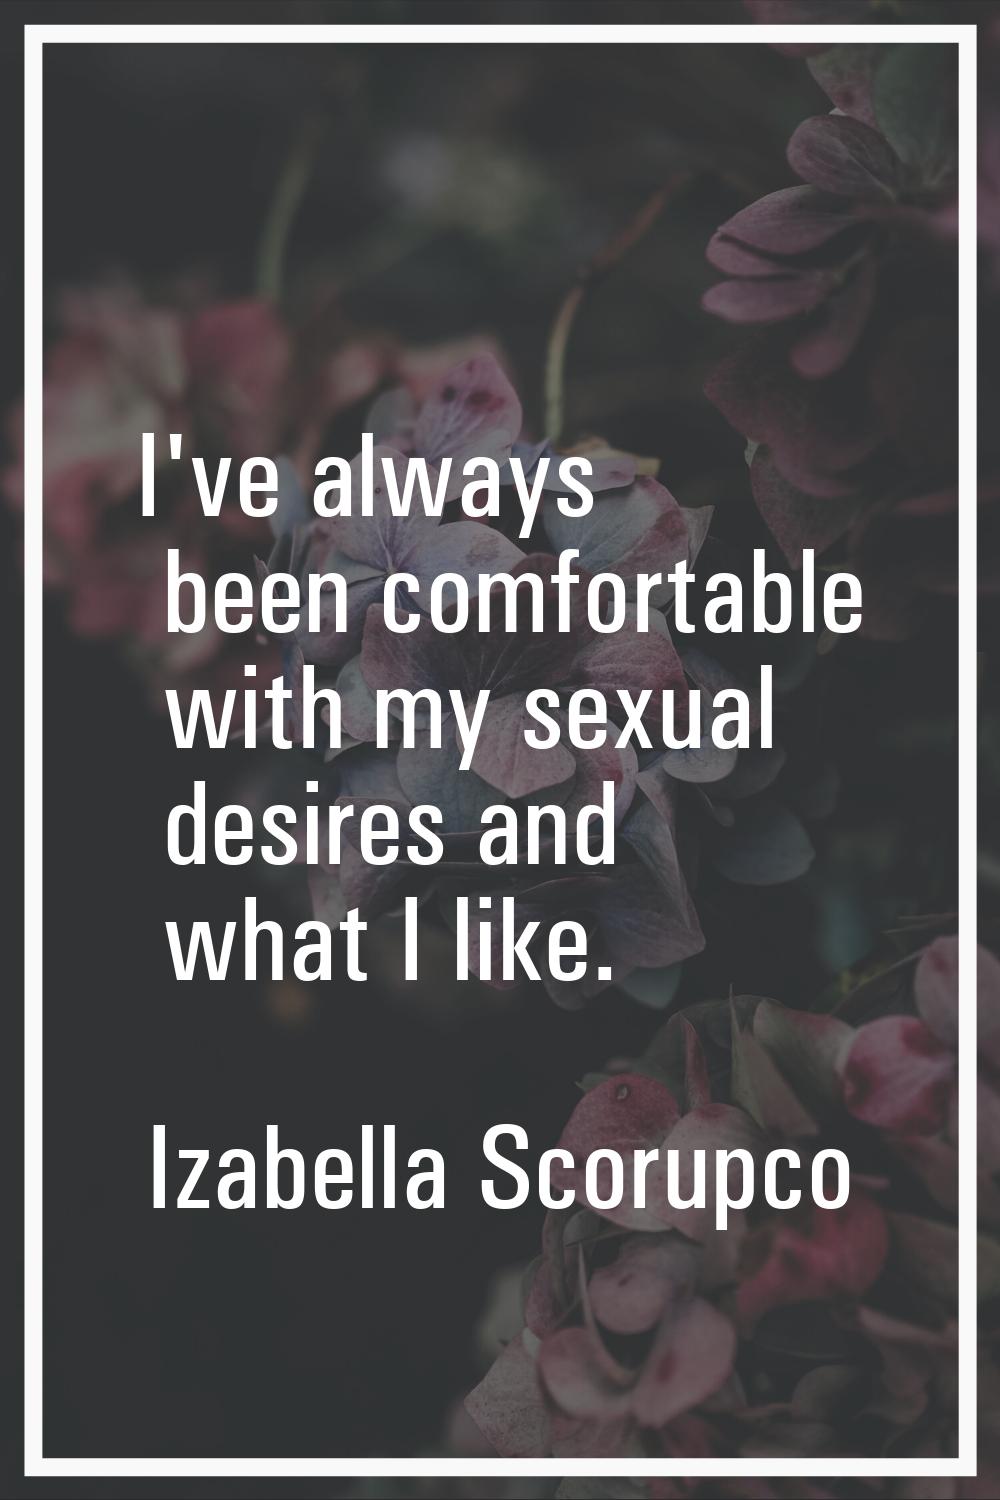 I've always been comfortable with my sexual desires and what I like.